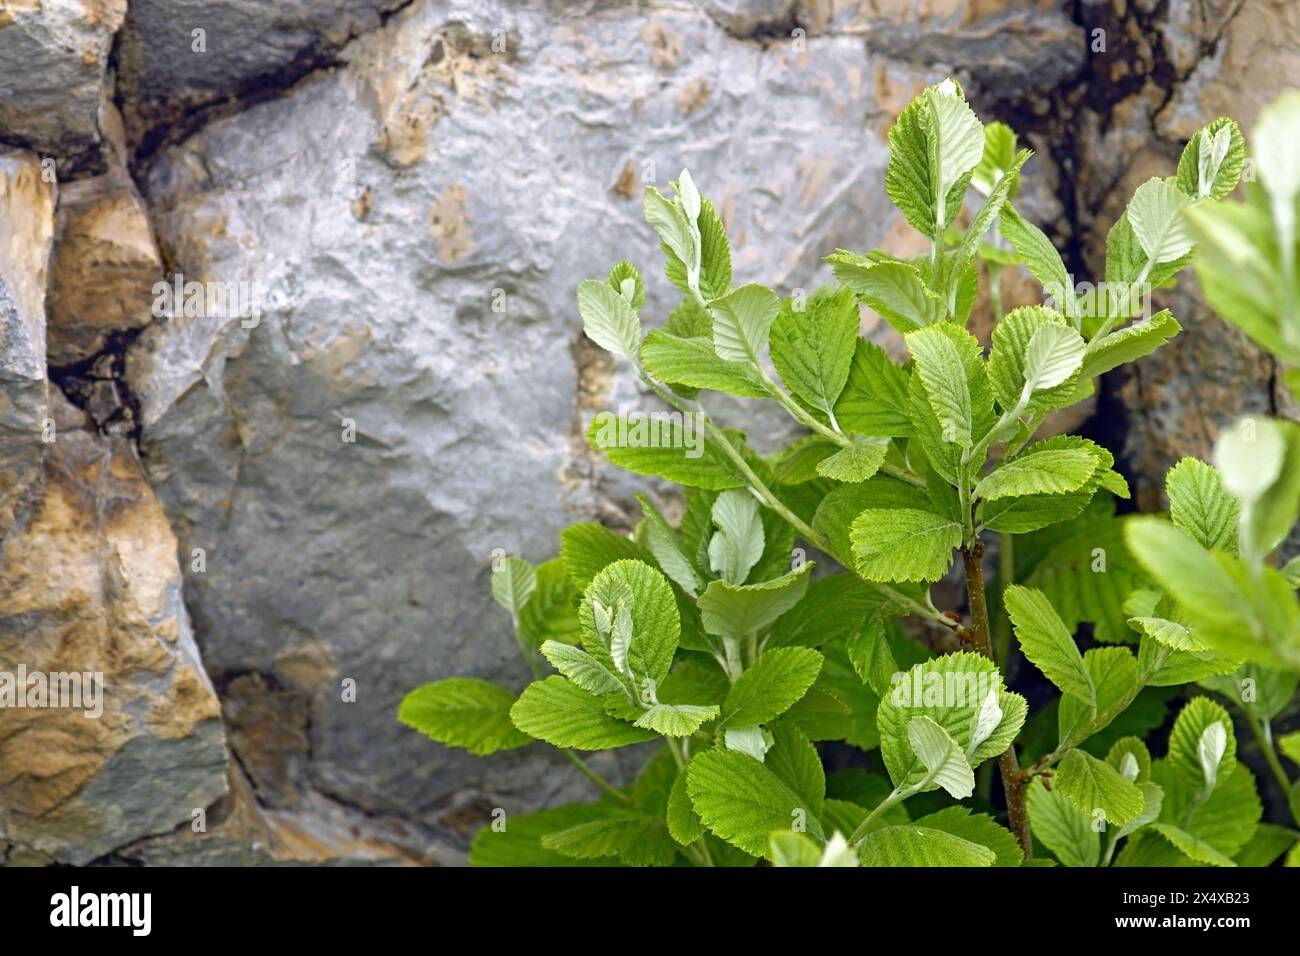 Twigs with fresh leaves of Aria rupicola bush growing near a rock in the mountains. Stock Photo